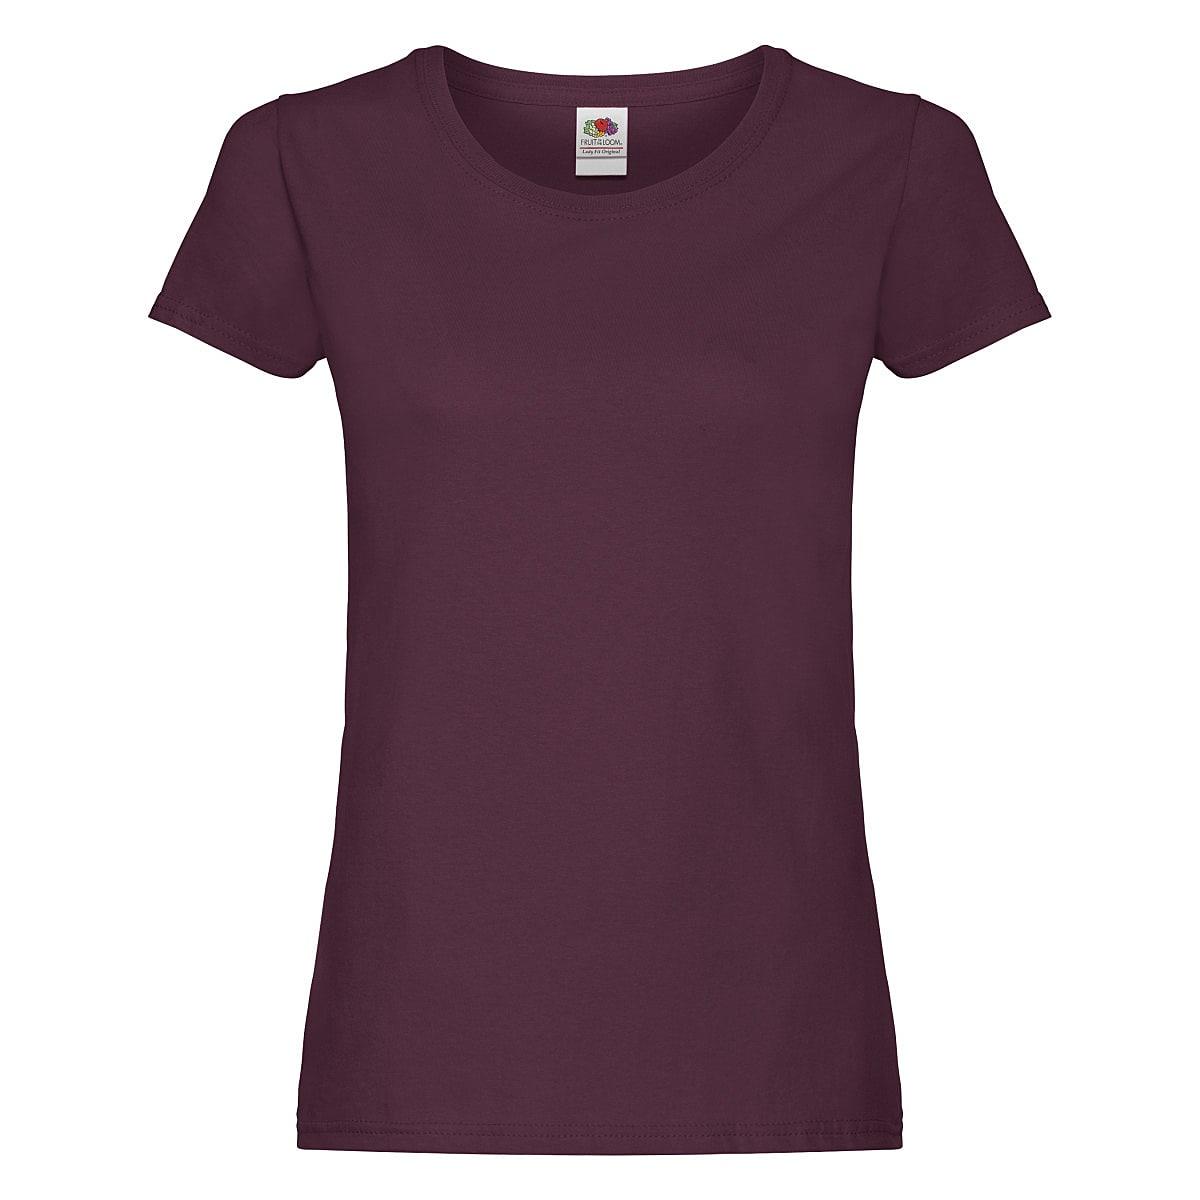 Fruit Of The Loom Lady Fit Original T-Shirt in Burgundy (Product Code: 61420)